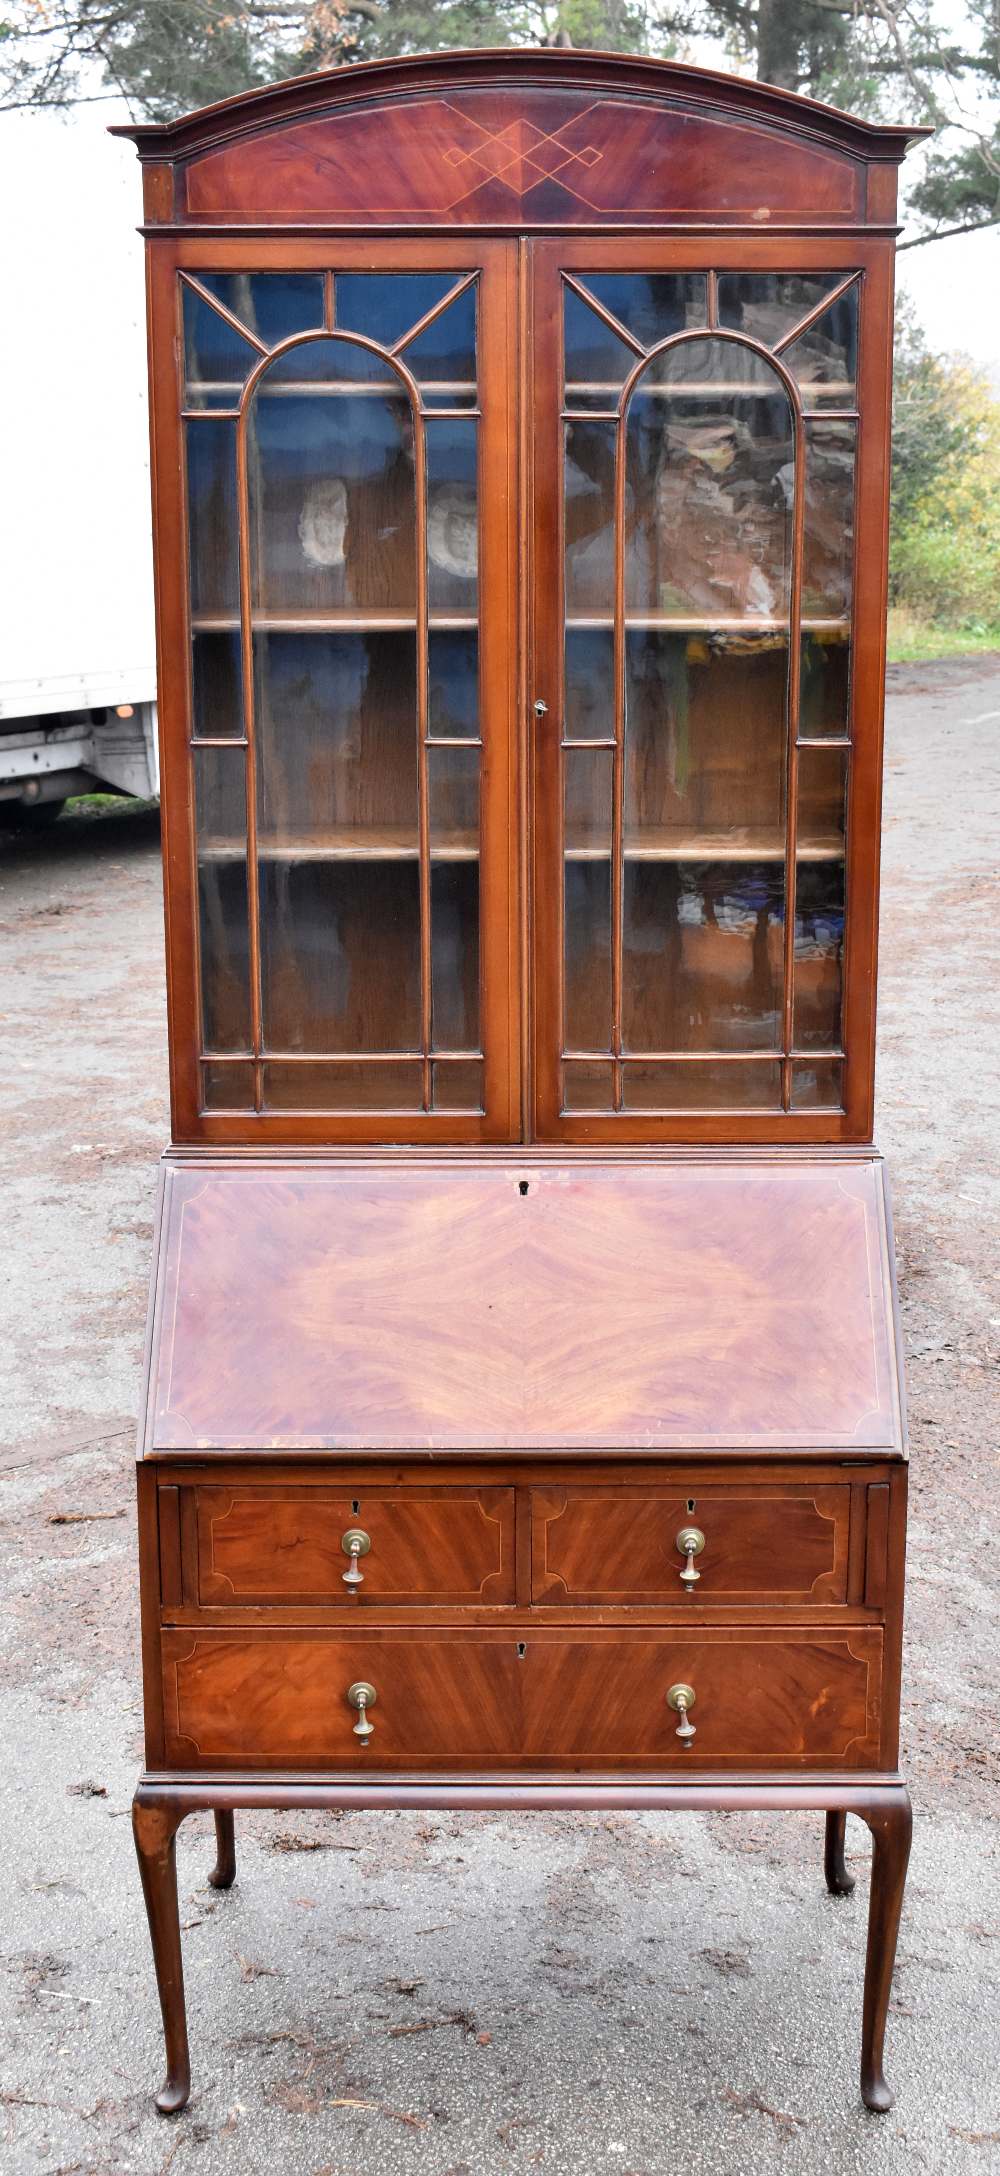 A late 19th century inlaid mahogany bureau bookcase, the upper section with two glazed doors, height